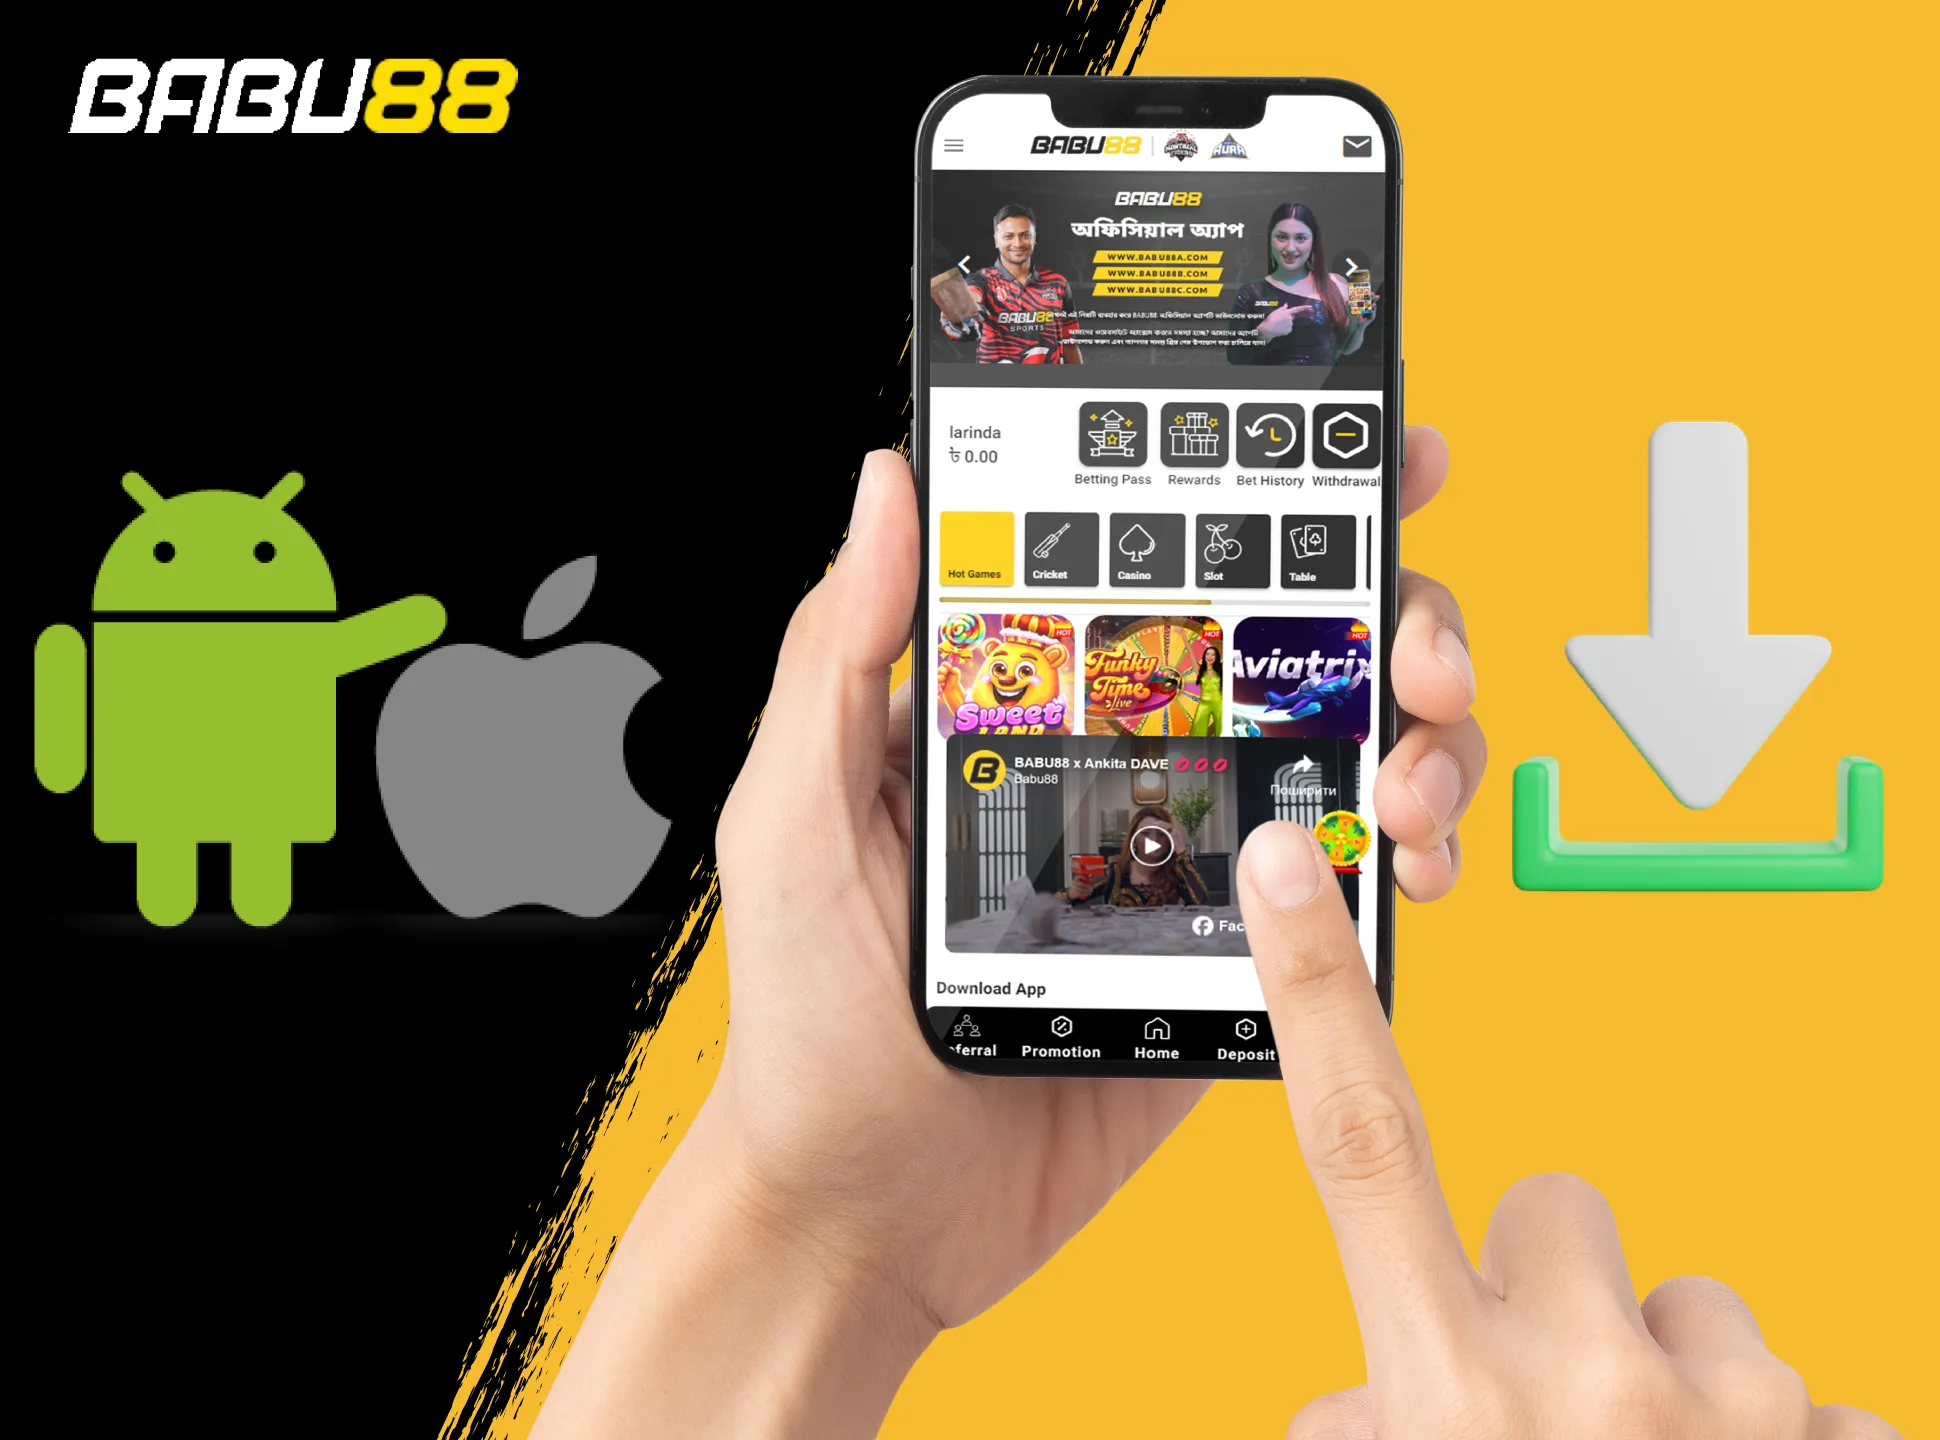 Install the Babu88 app to place bets via your smartphone.